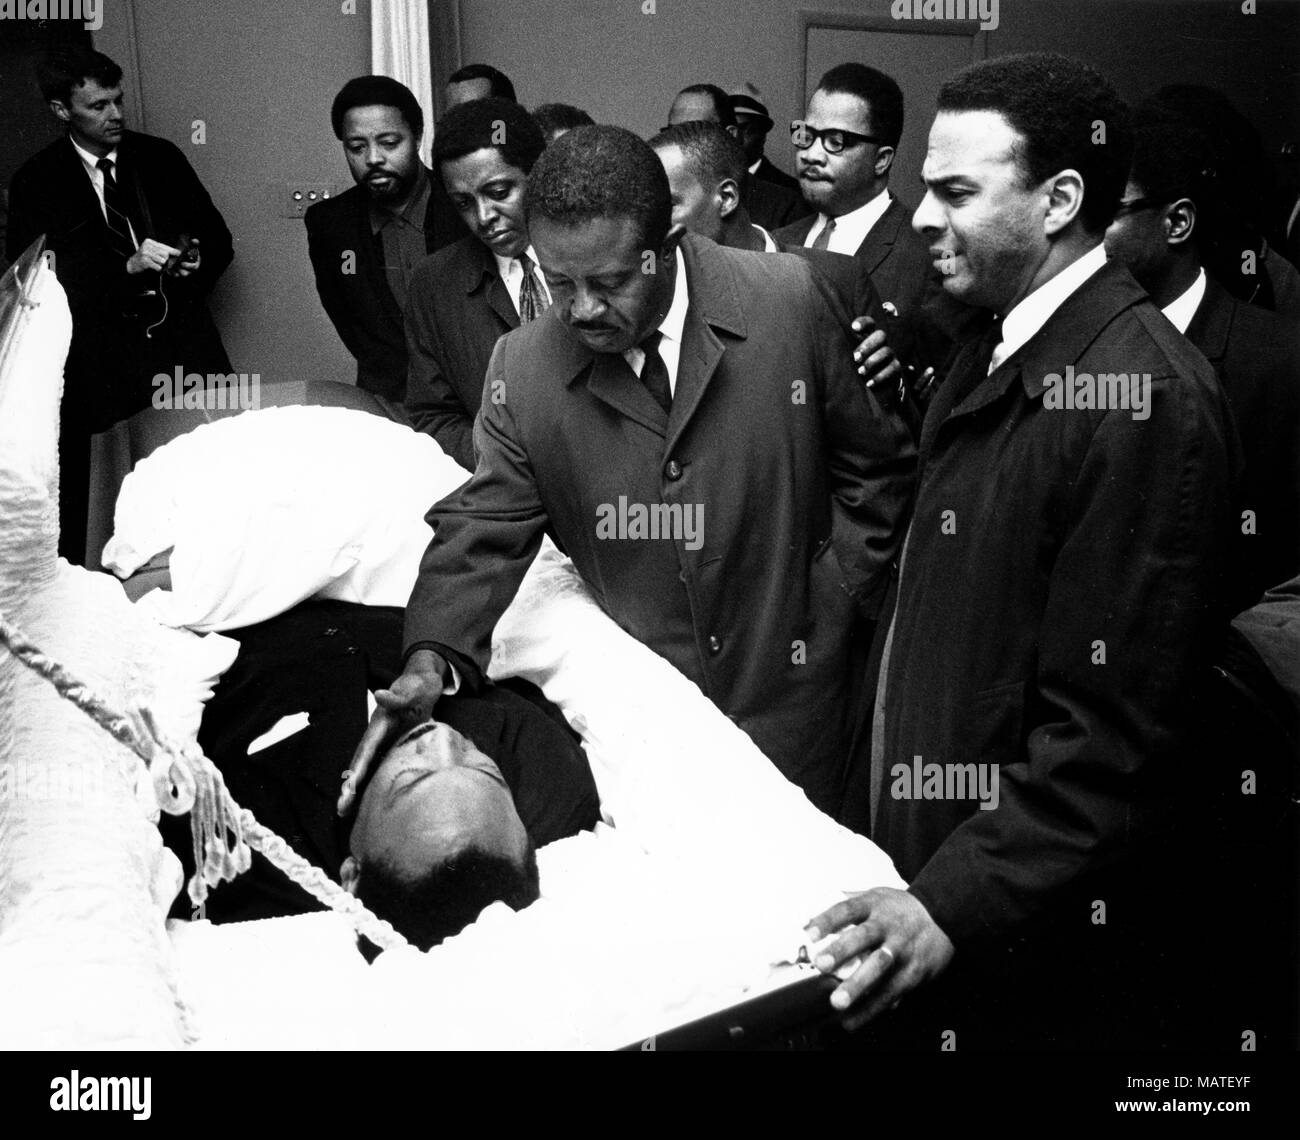 April 4, 2018 - FILE - Reverend MARTIN LUTHER KING JR. was fatally shot by J. Earl Ray at 6:01 p.m., April 4, 1968, as he stood on second-floor balcony of Lorraine Hotel in Memphis Tennessee. Pictured: April 9, 1968 - Atlanta, GA, U.S. - Martin Luther King, Jr.'s funeral in Atlanta. Pictured: Mourners gather around to say good bye at funeral.(Credit Image: © Keystone Press Agency/Keystone USA via ZUMAPRESS.com) Stock Photo